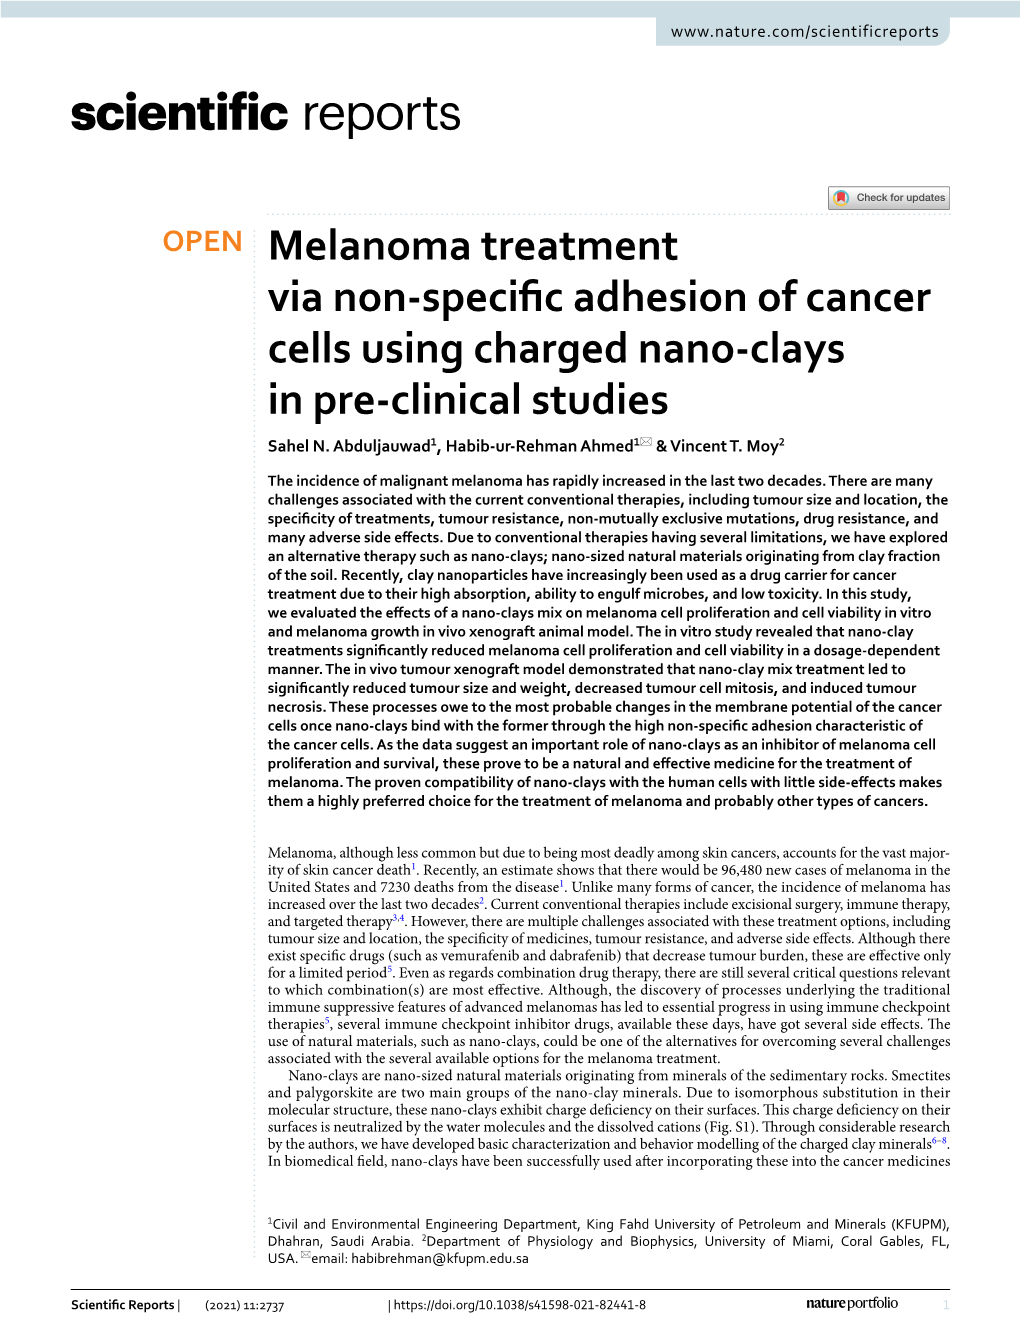 Melanoma Treatment Via Non-Specific Adhesion of Cancer Cells Using